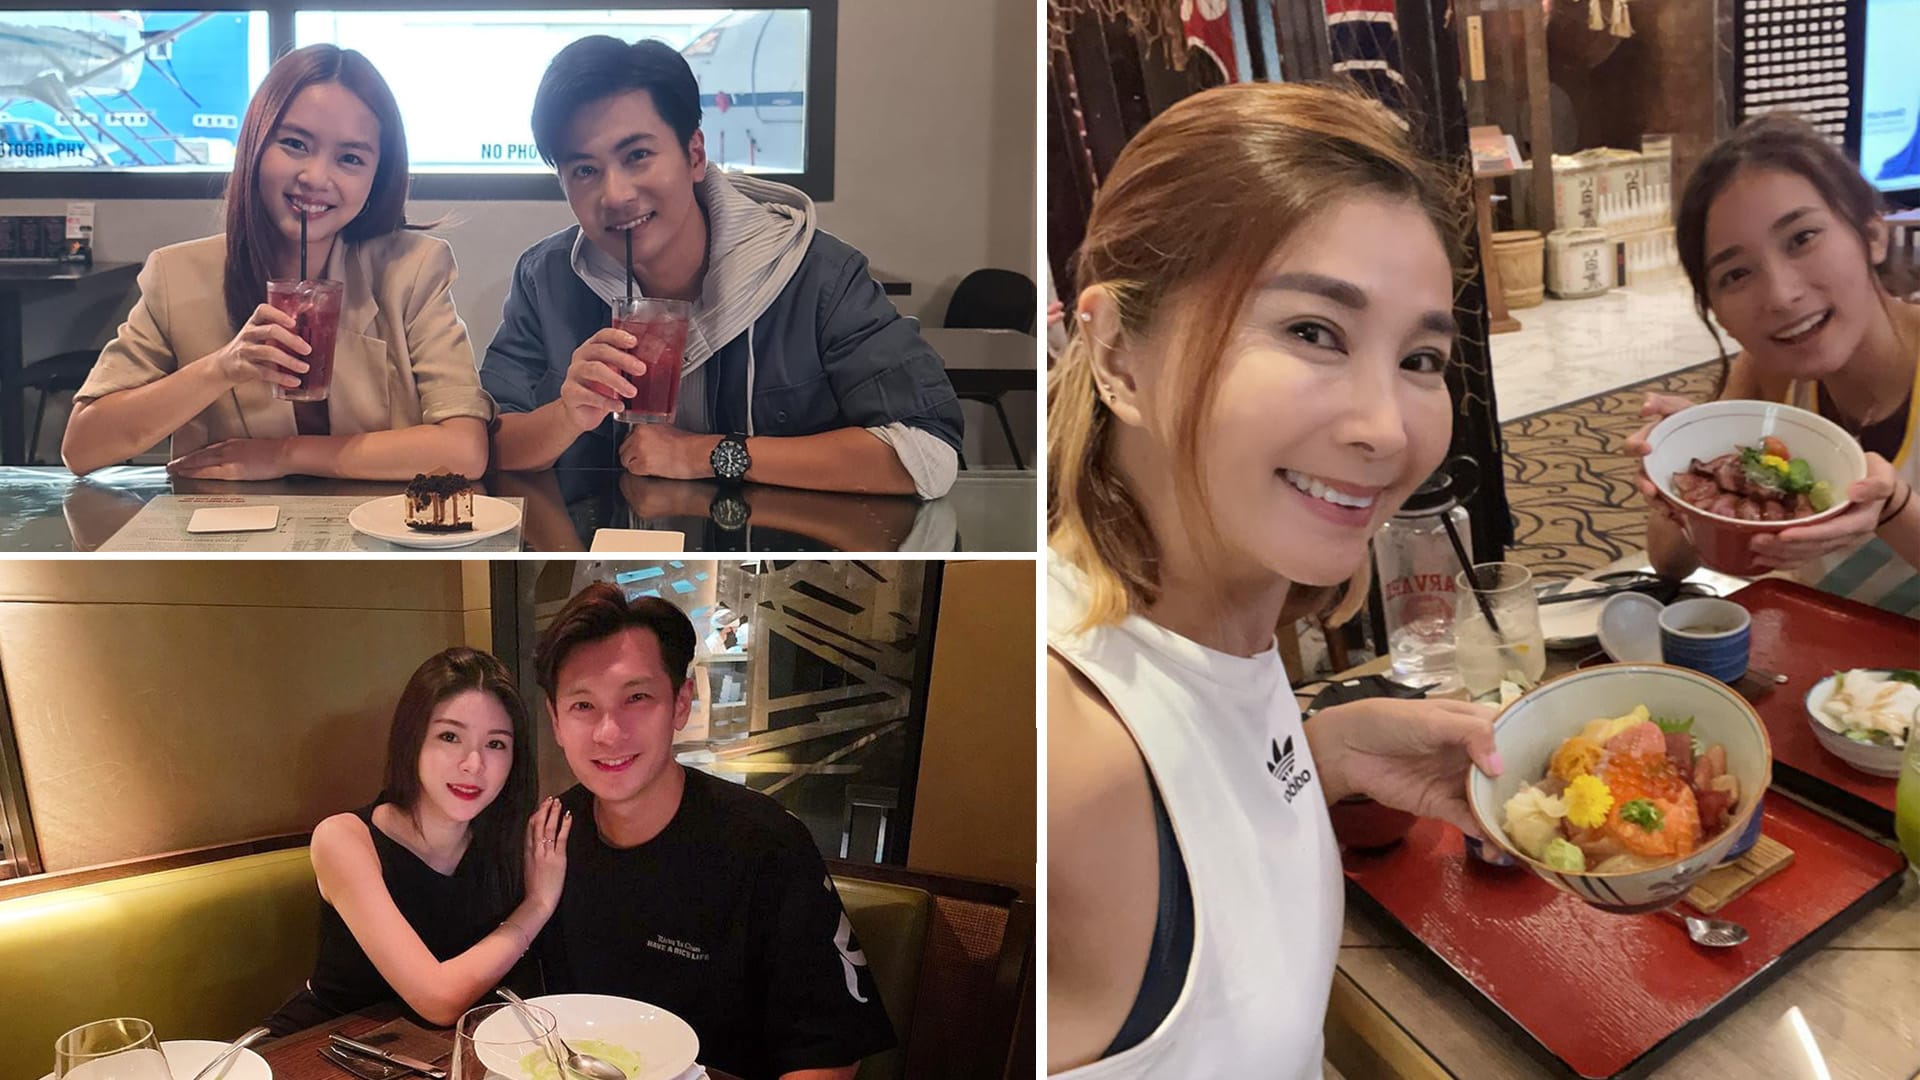 Celebs’ First Meal Out In P3HA: Shaun Chen Celebrated Wed Anniversary, Chantalle Ng & Xu Bin Had Tea